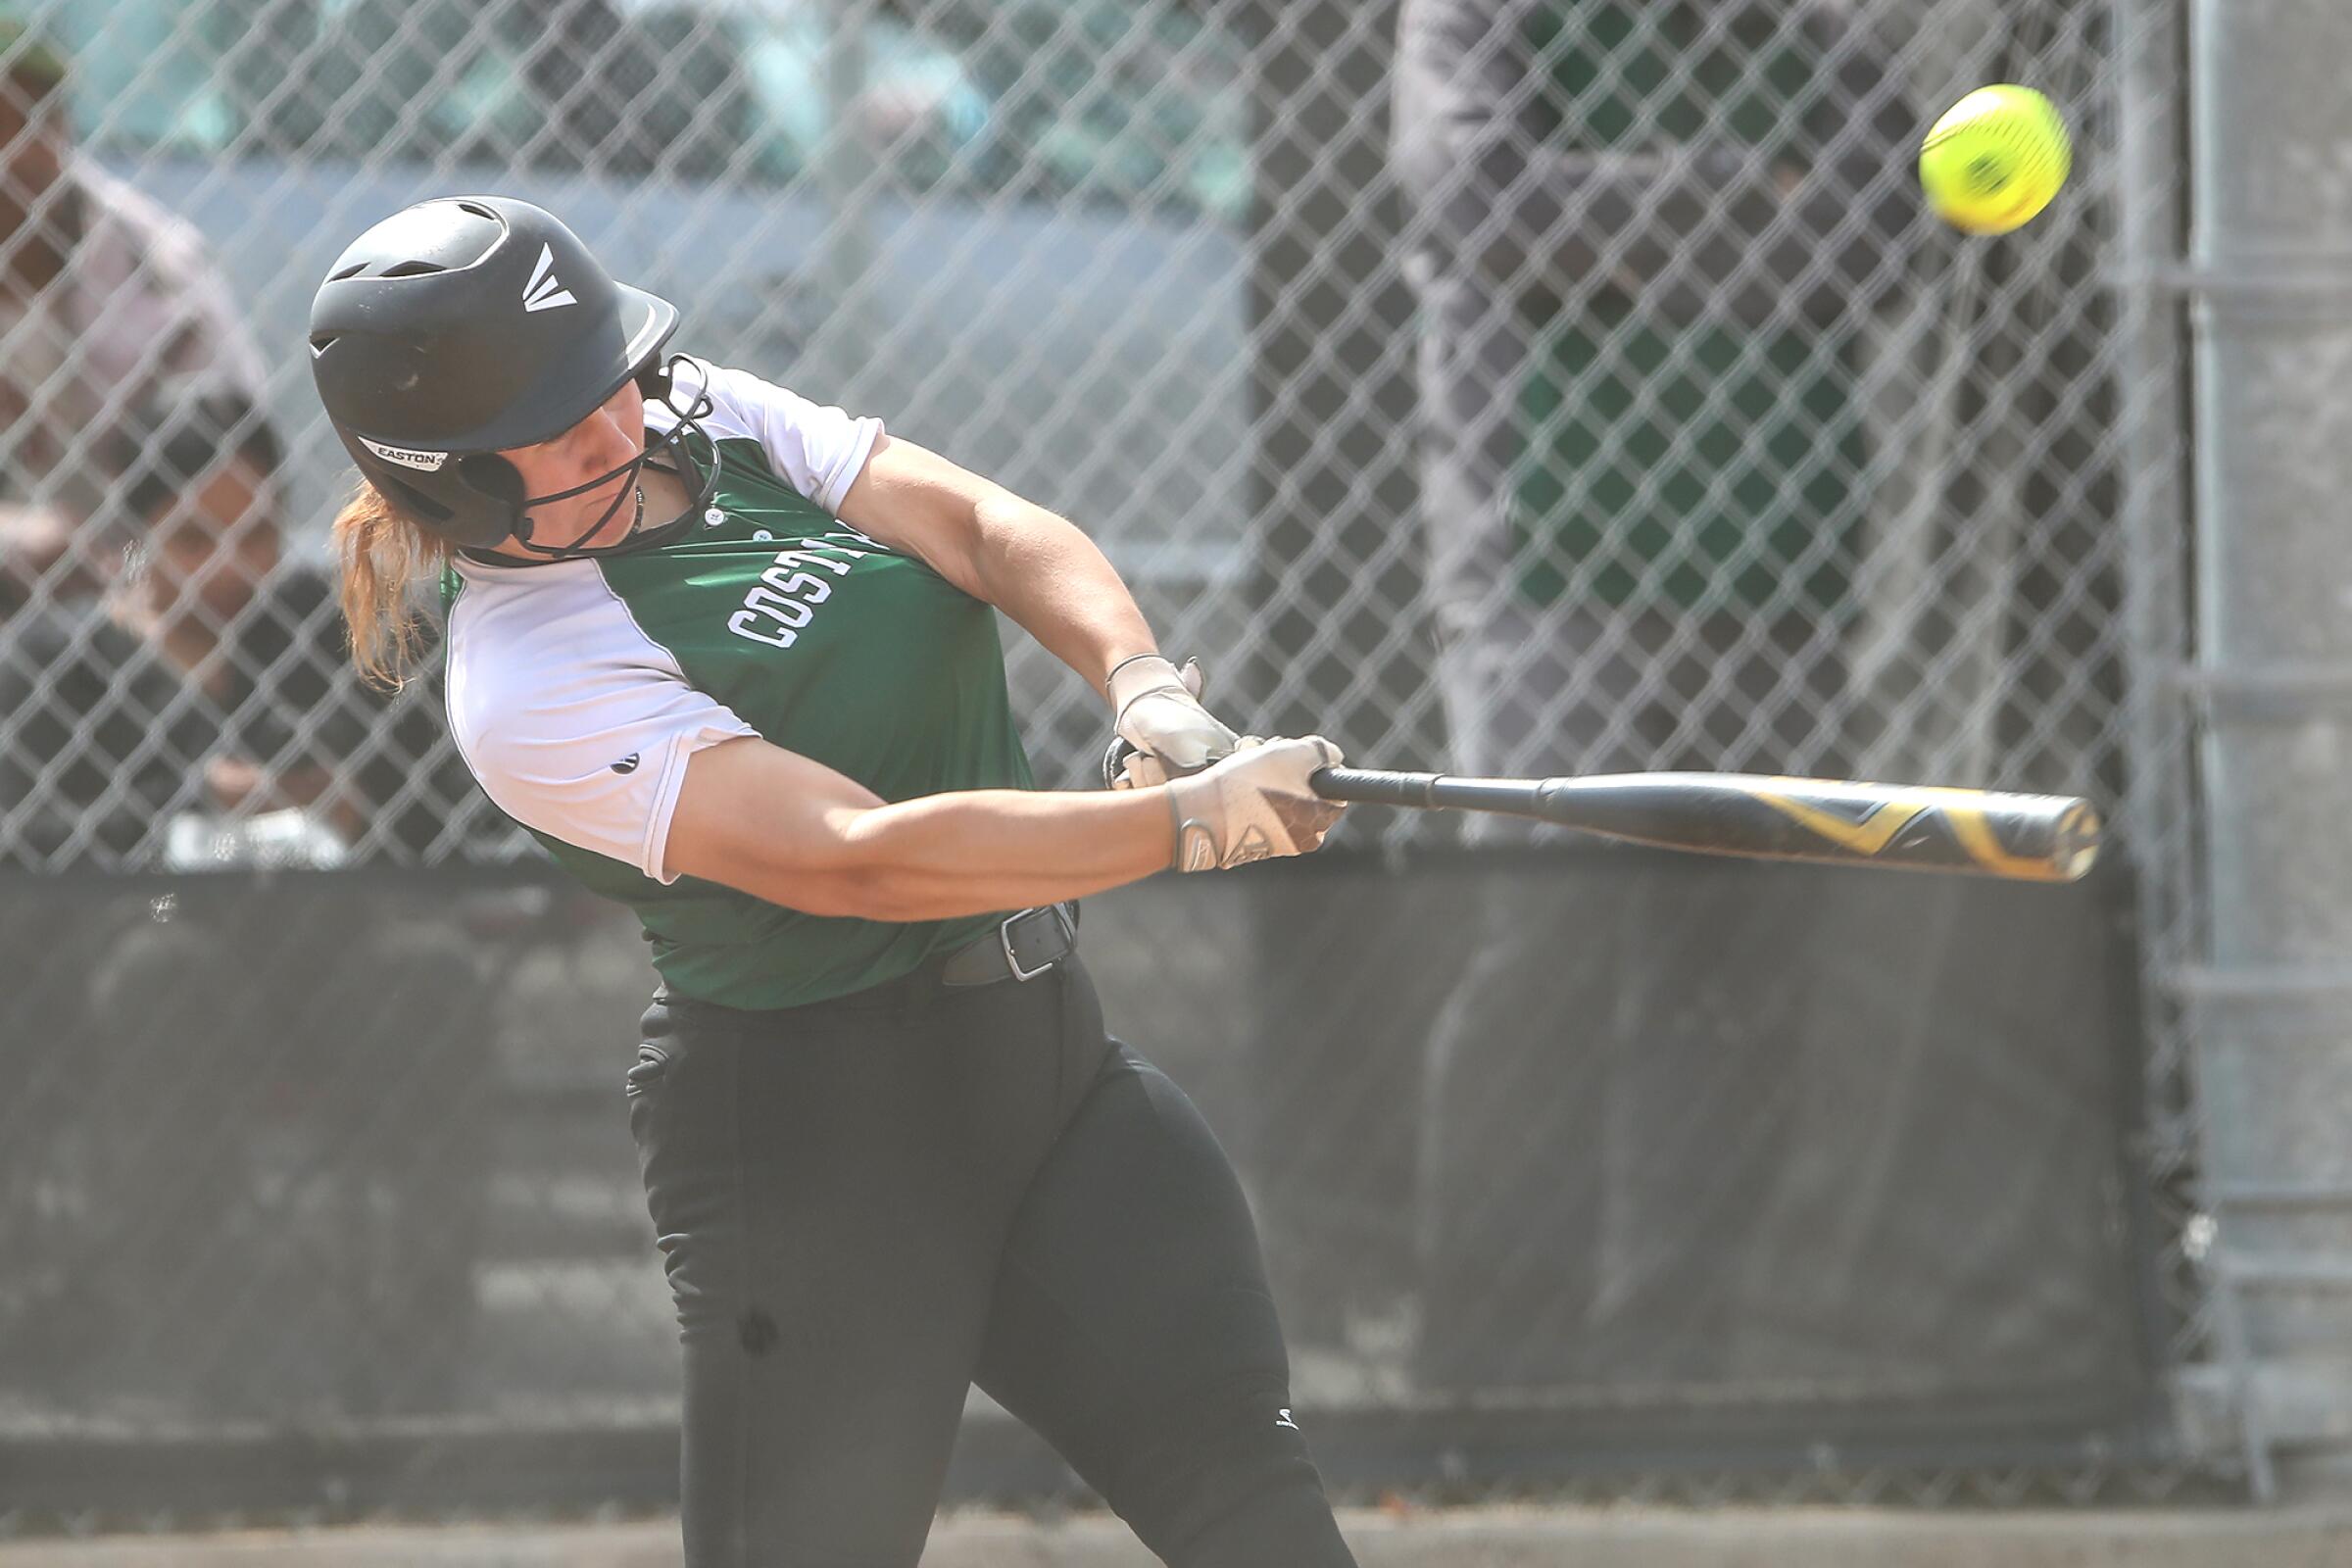 Costa Mesa's Sydnie Pulido hits a single in the first round of the CIF Southern Section Division 6 softball playoffs against Pasadena Mayfield on Thursday.